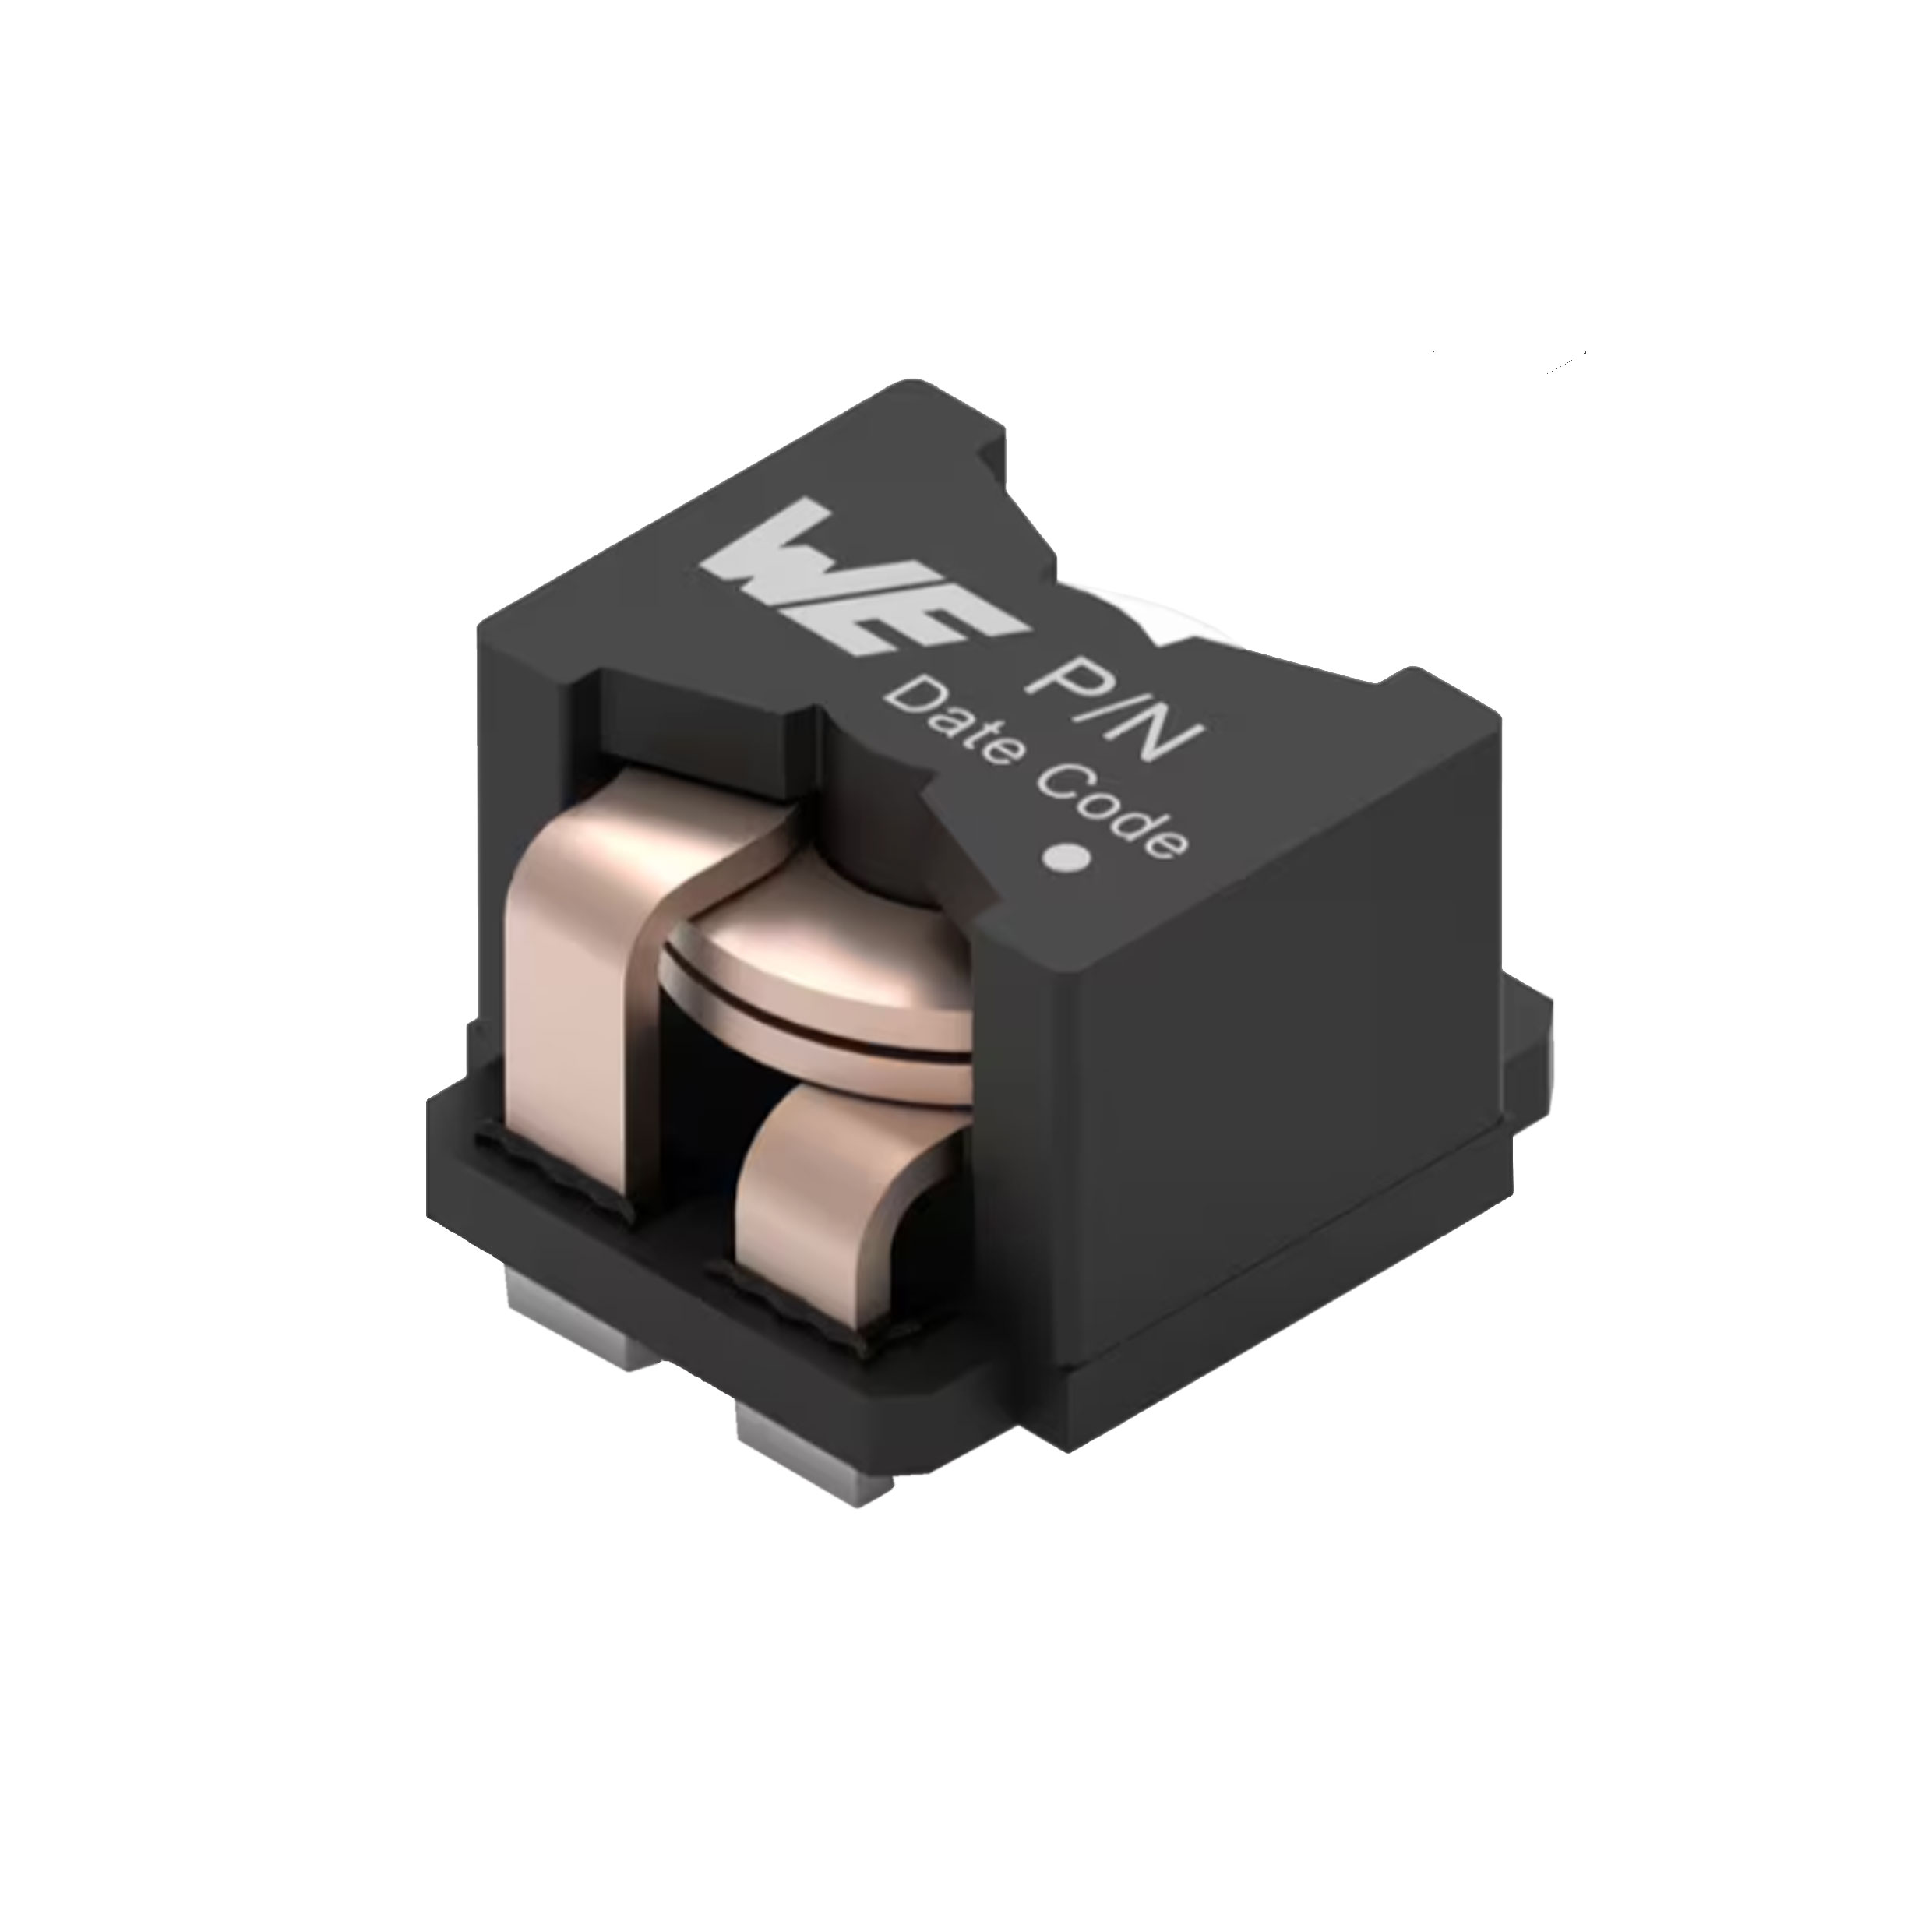 【7843763521015】THT HIGH CURRENT INDUCTOR 3521;